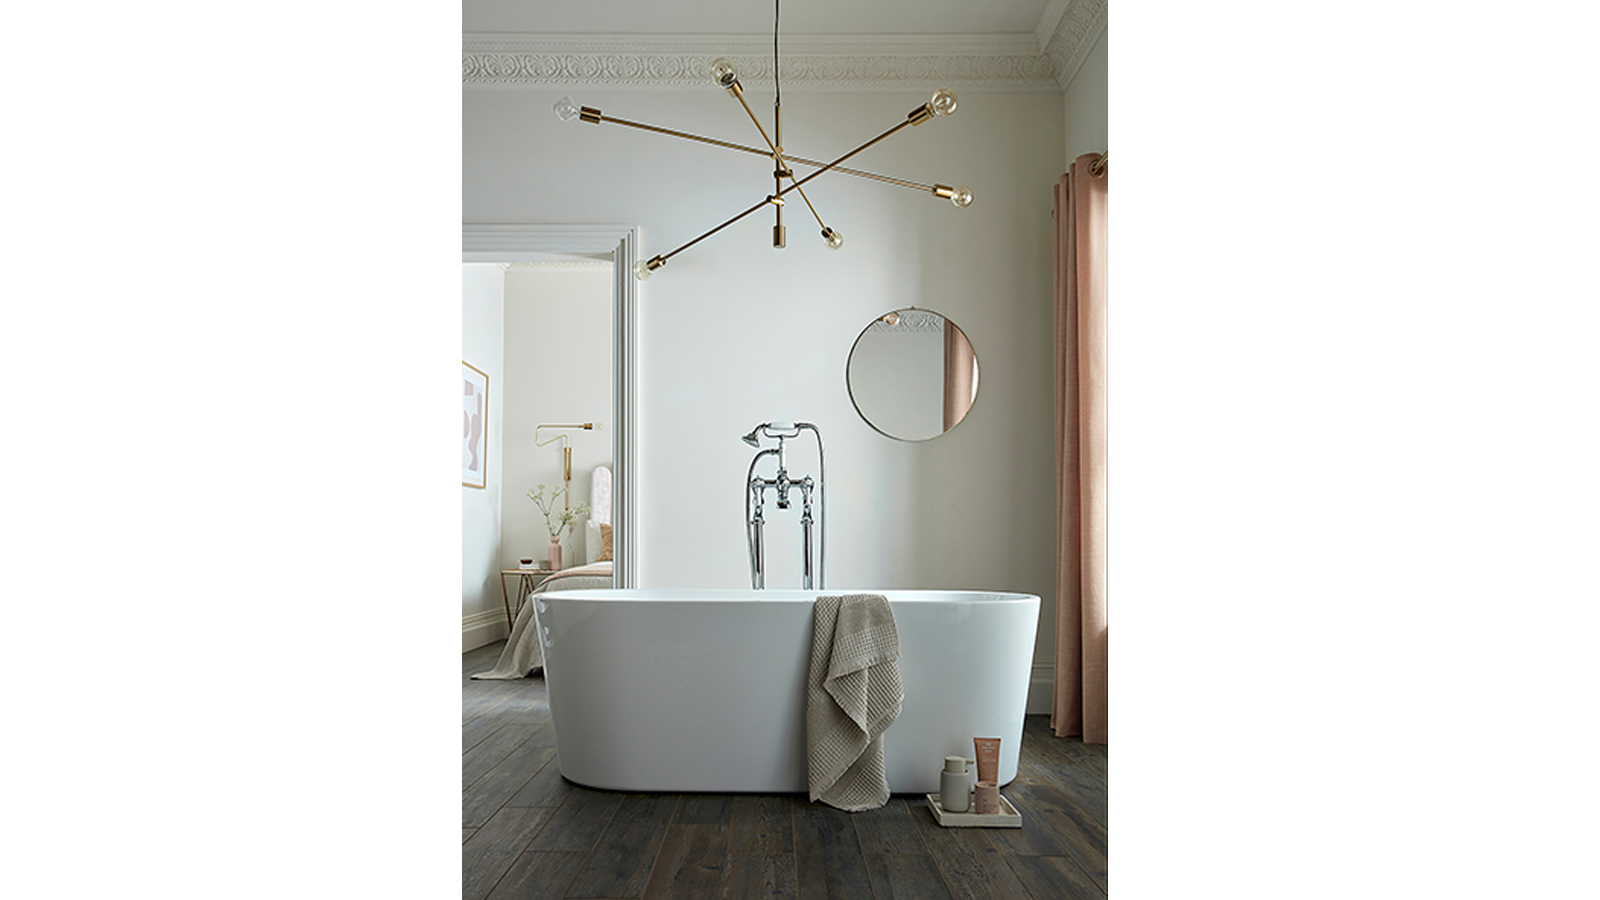 Bathroom trends for 2020 1